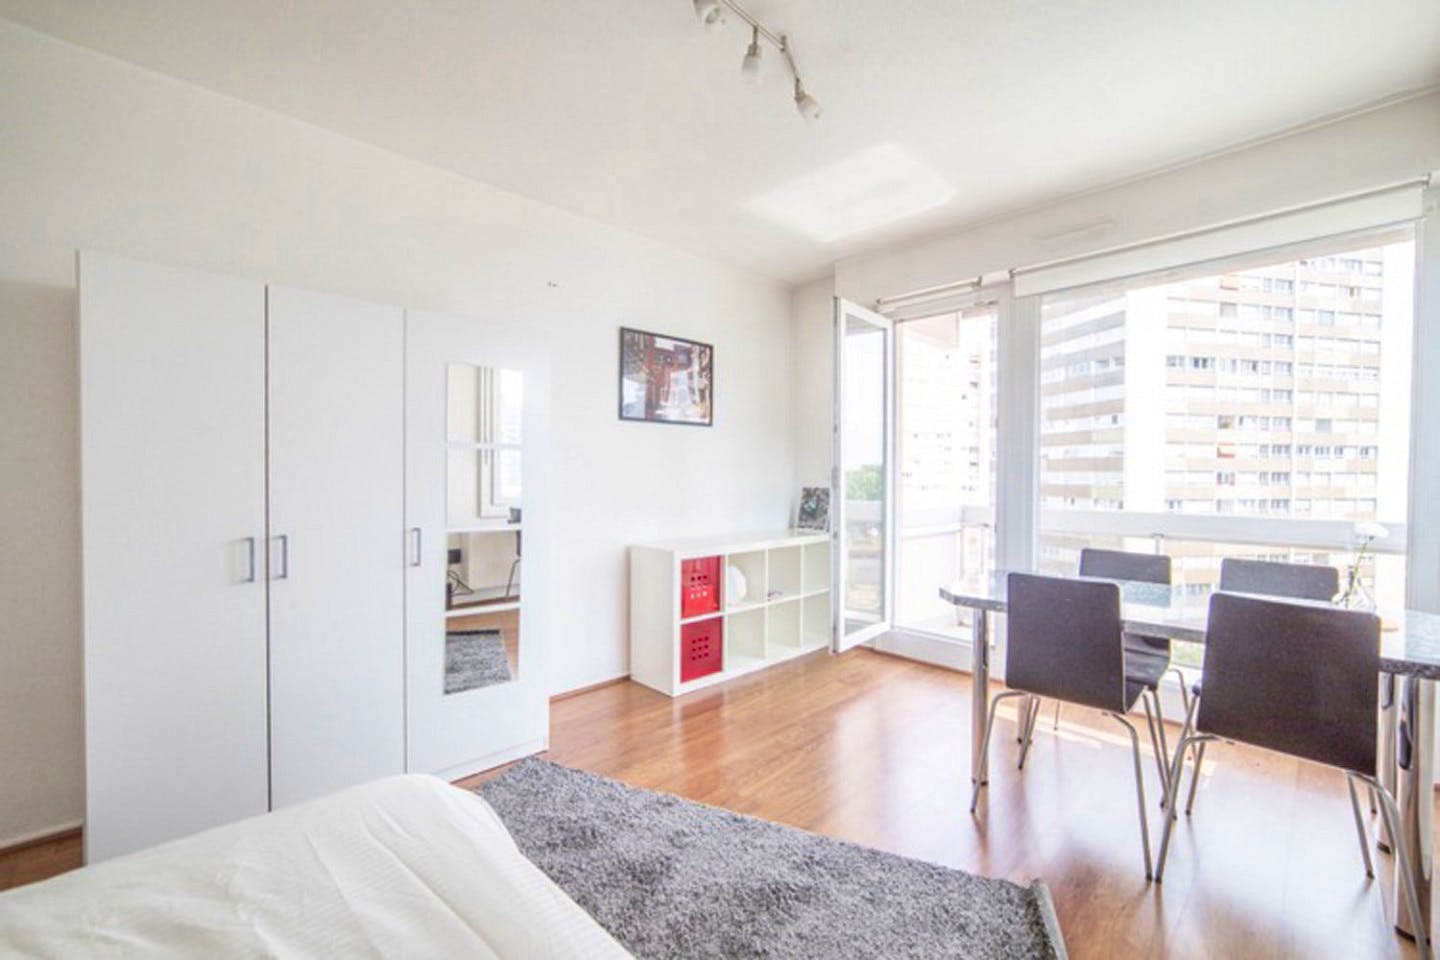 Apartment located near the University of Strasbourg